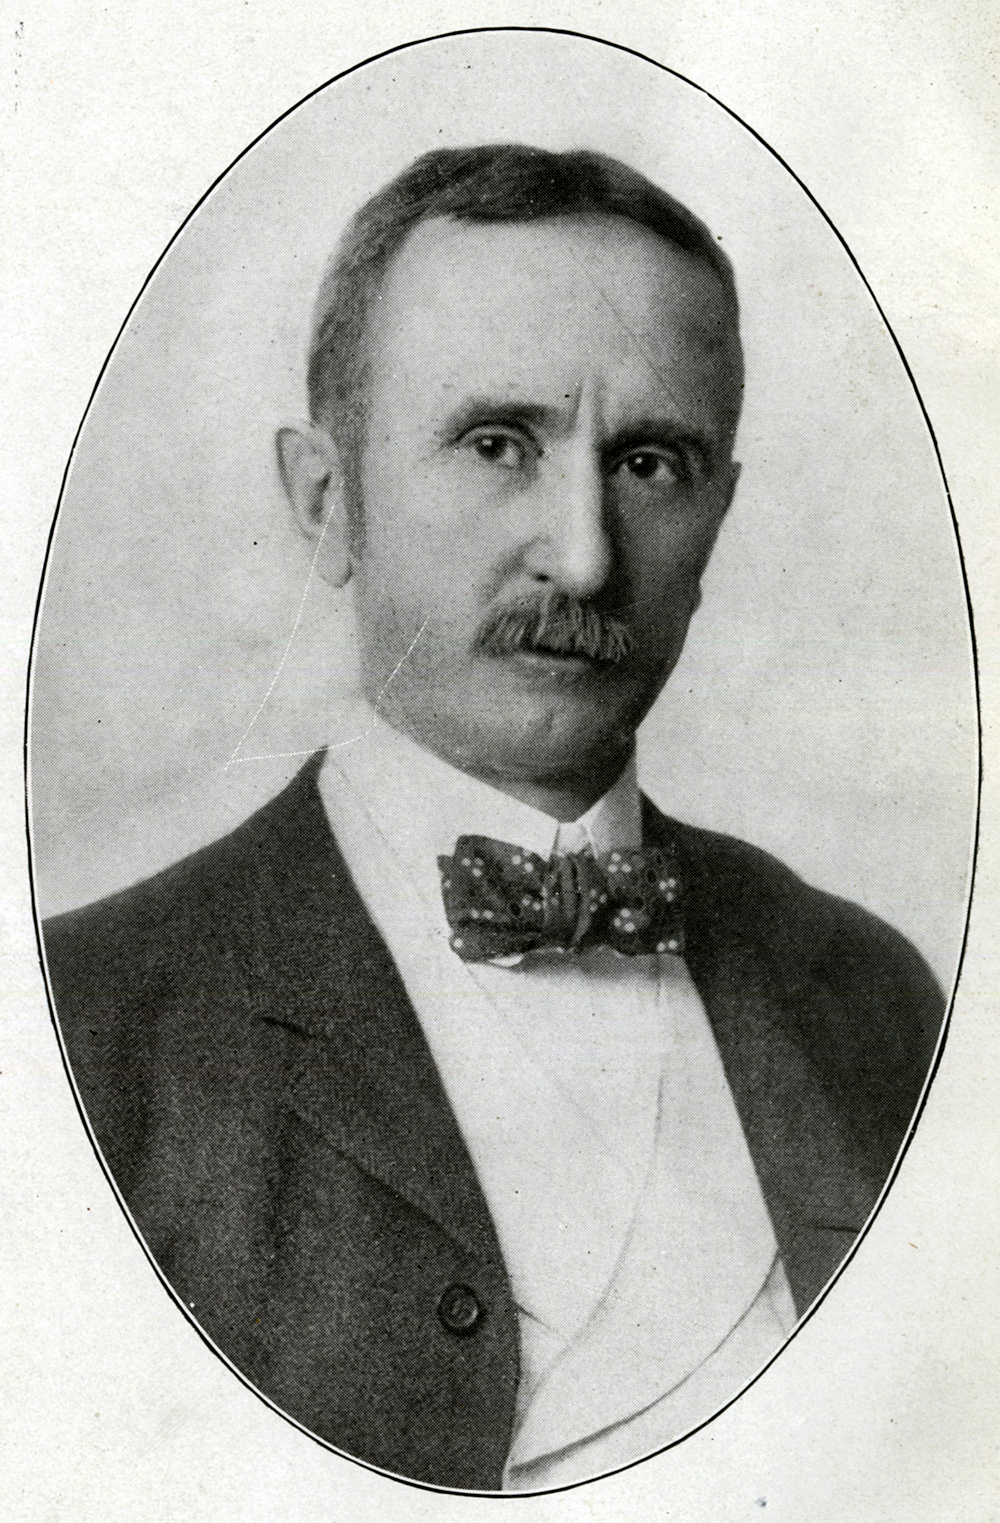 August R. Meyer, first president of the Board of Parks Commissioners.